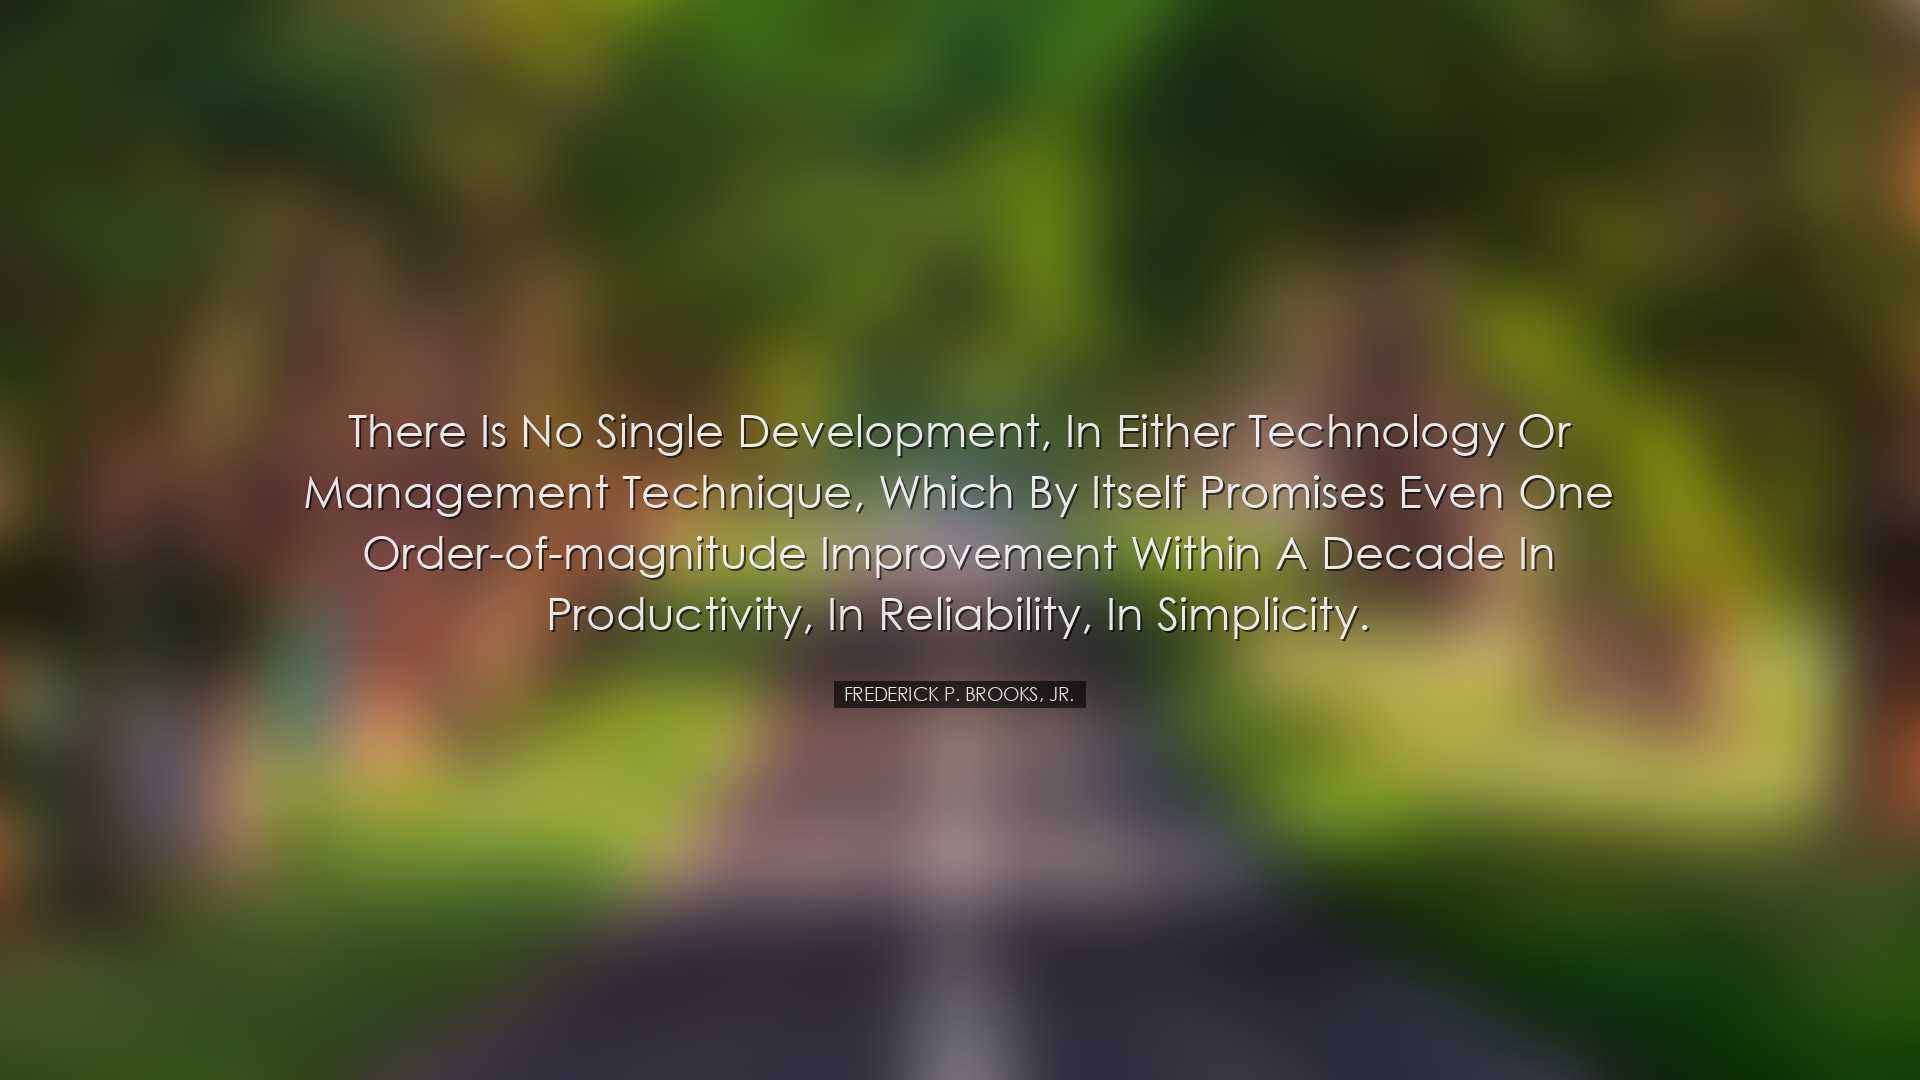 There is no single development, in either technology or management